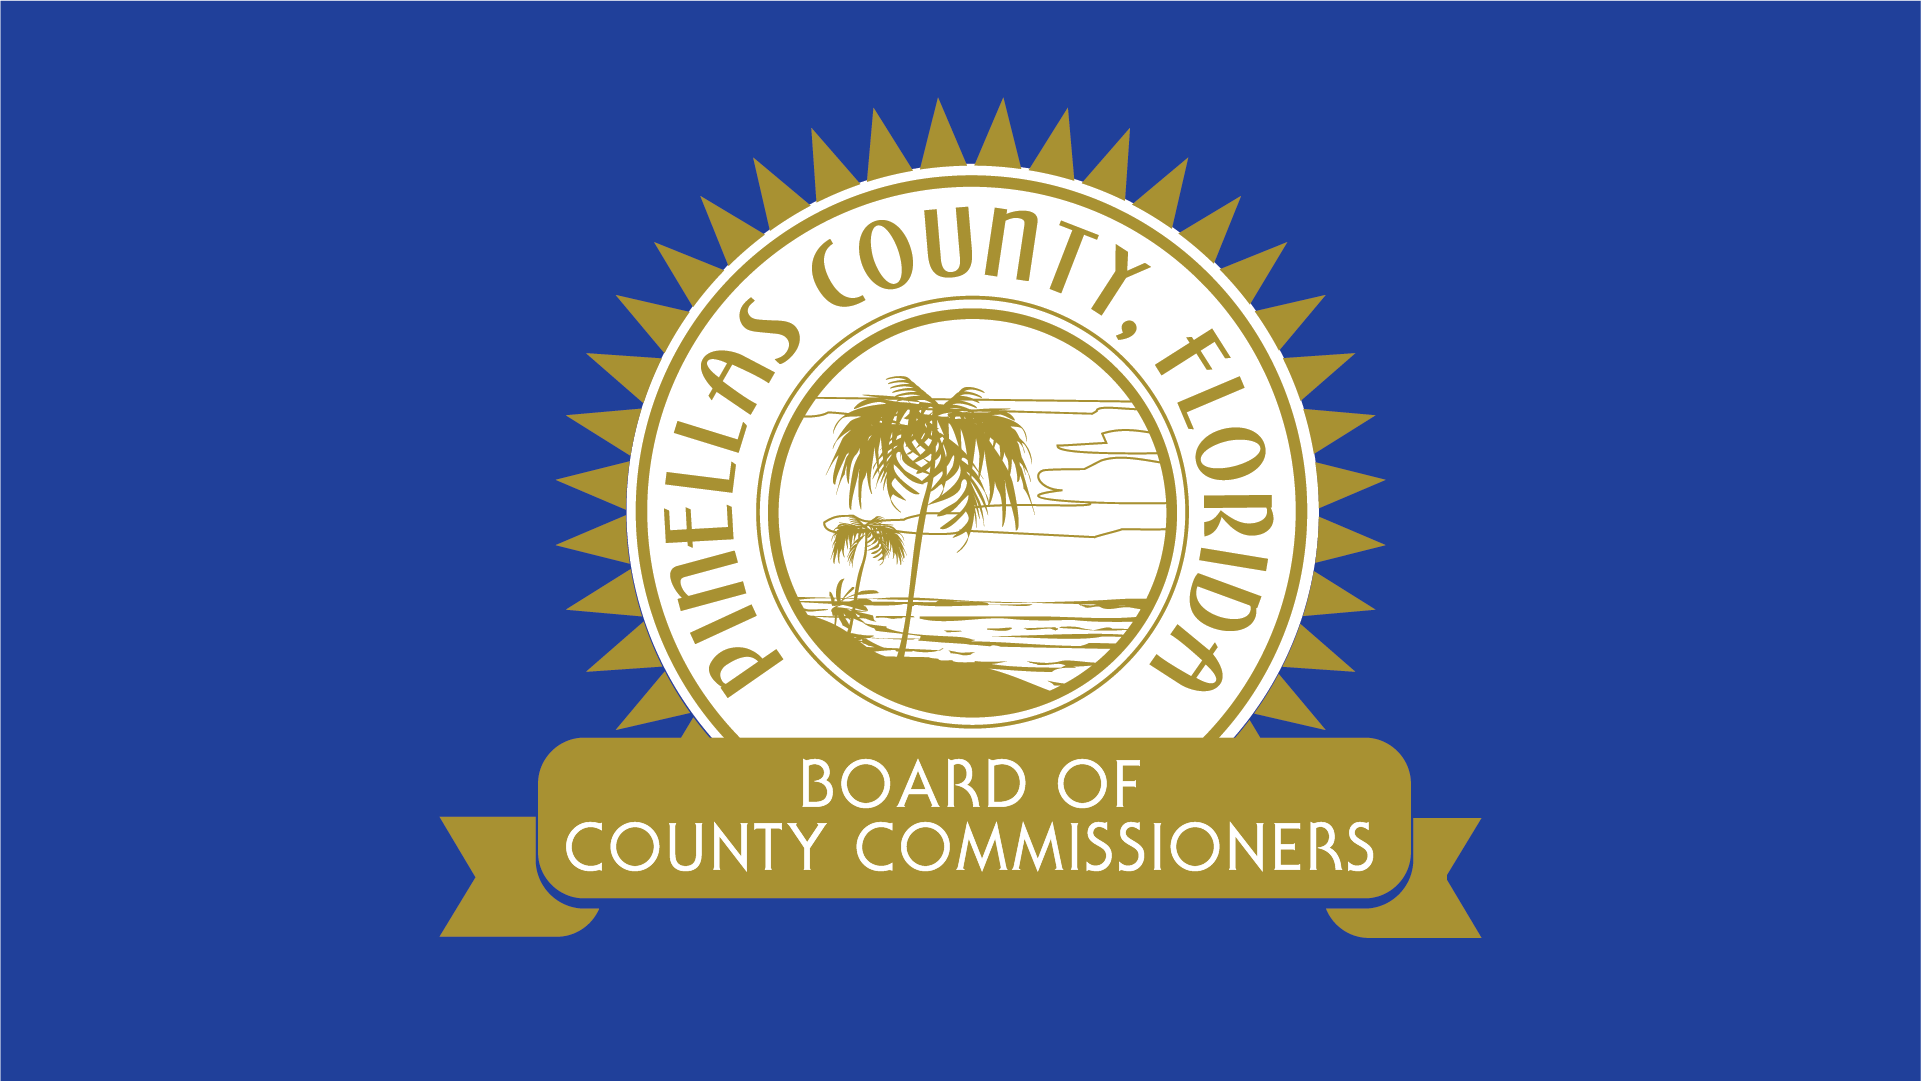 The gold Board of County Commissioners seal on a blue background